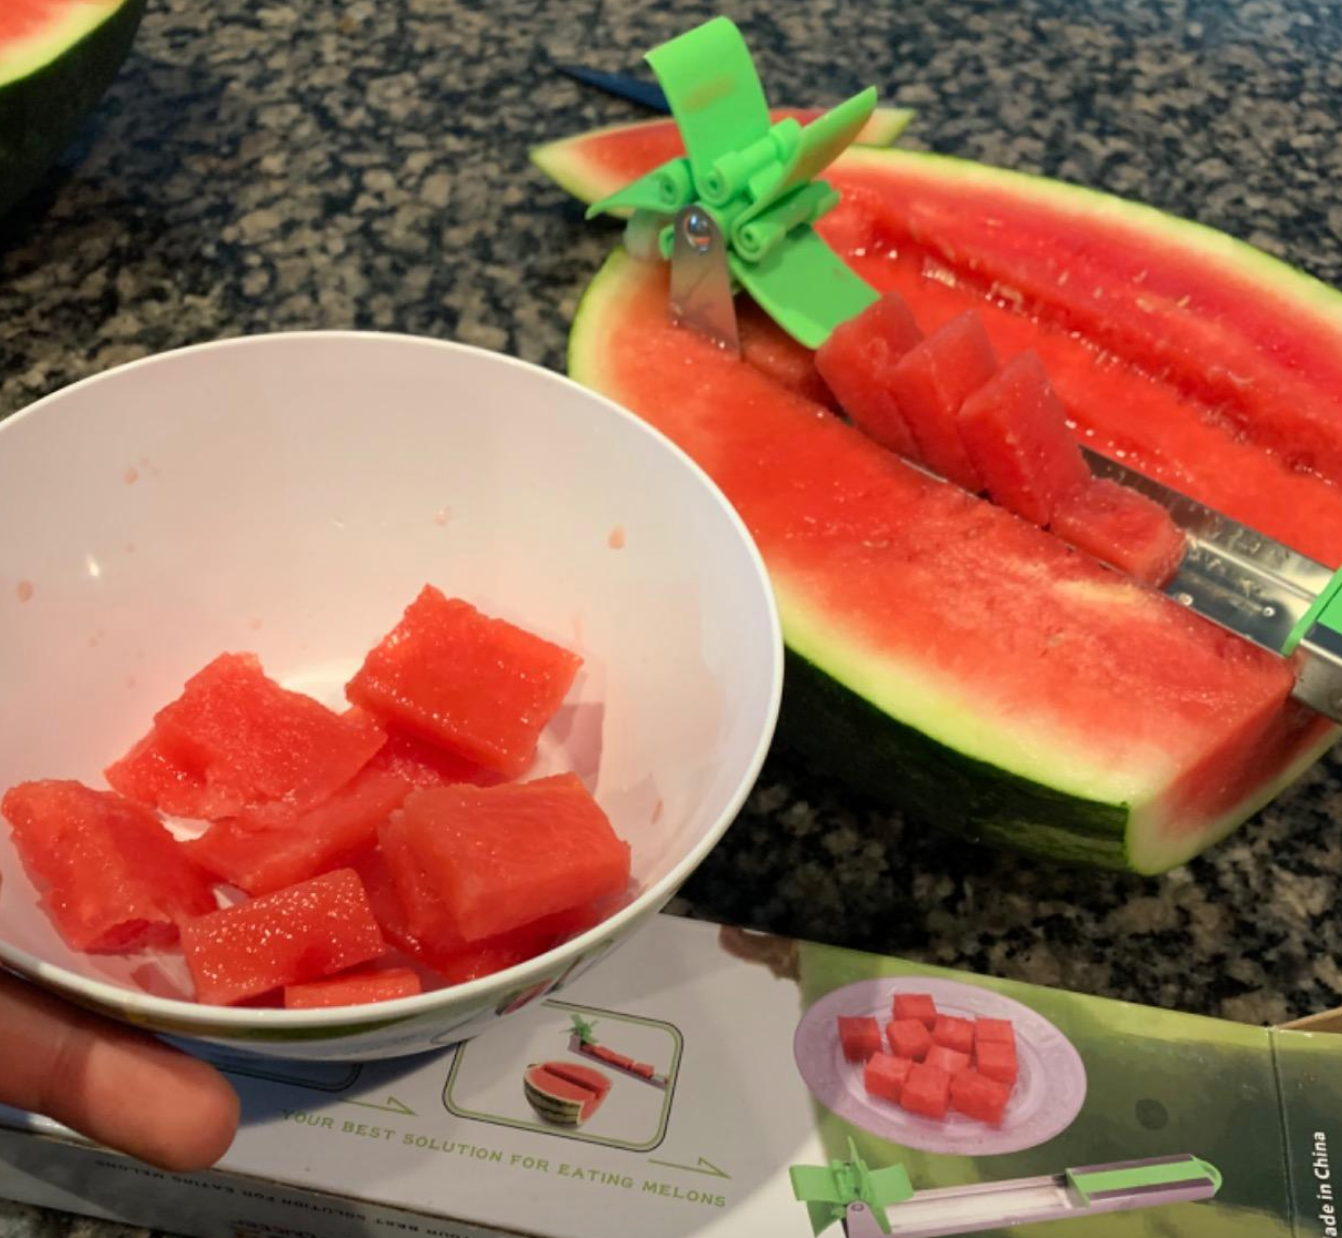 Reviewer using rotating green tool to cut slices from an open watermelon